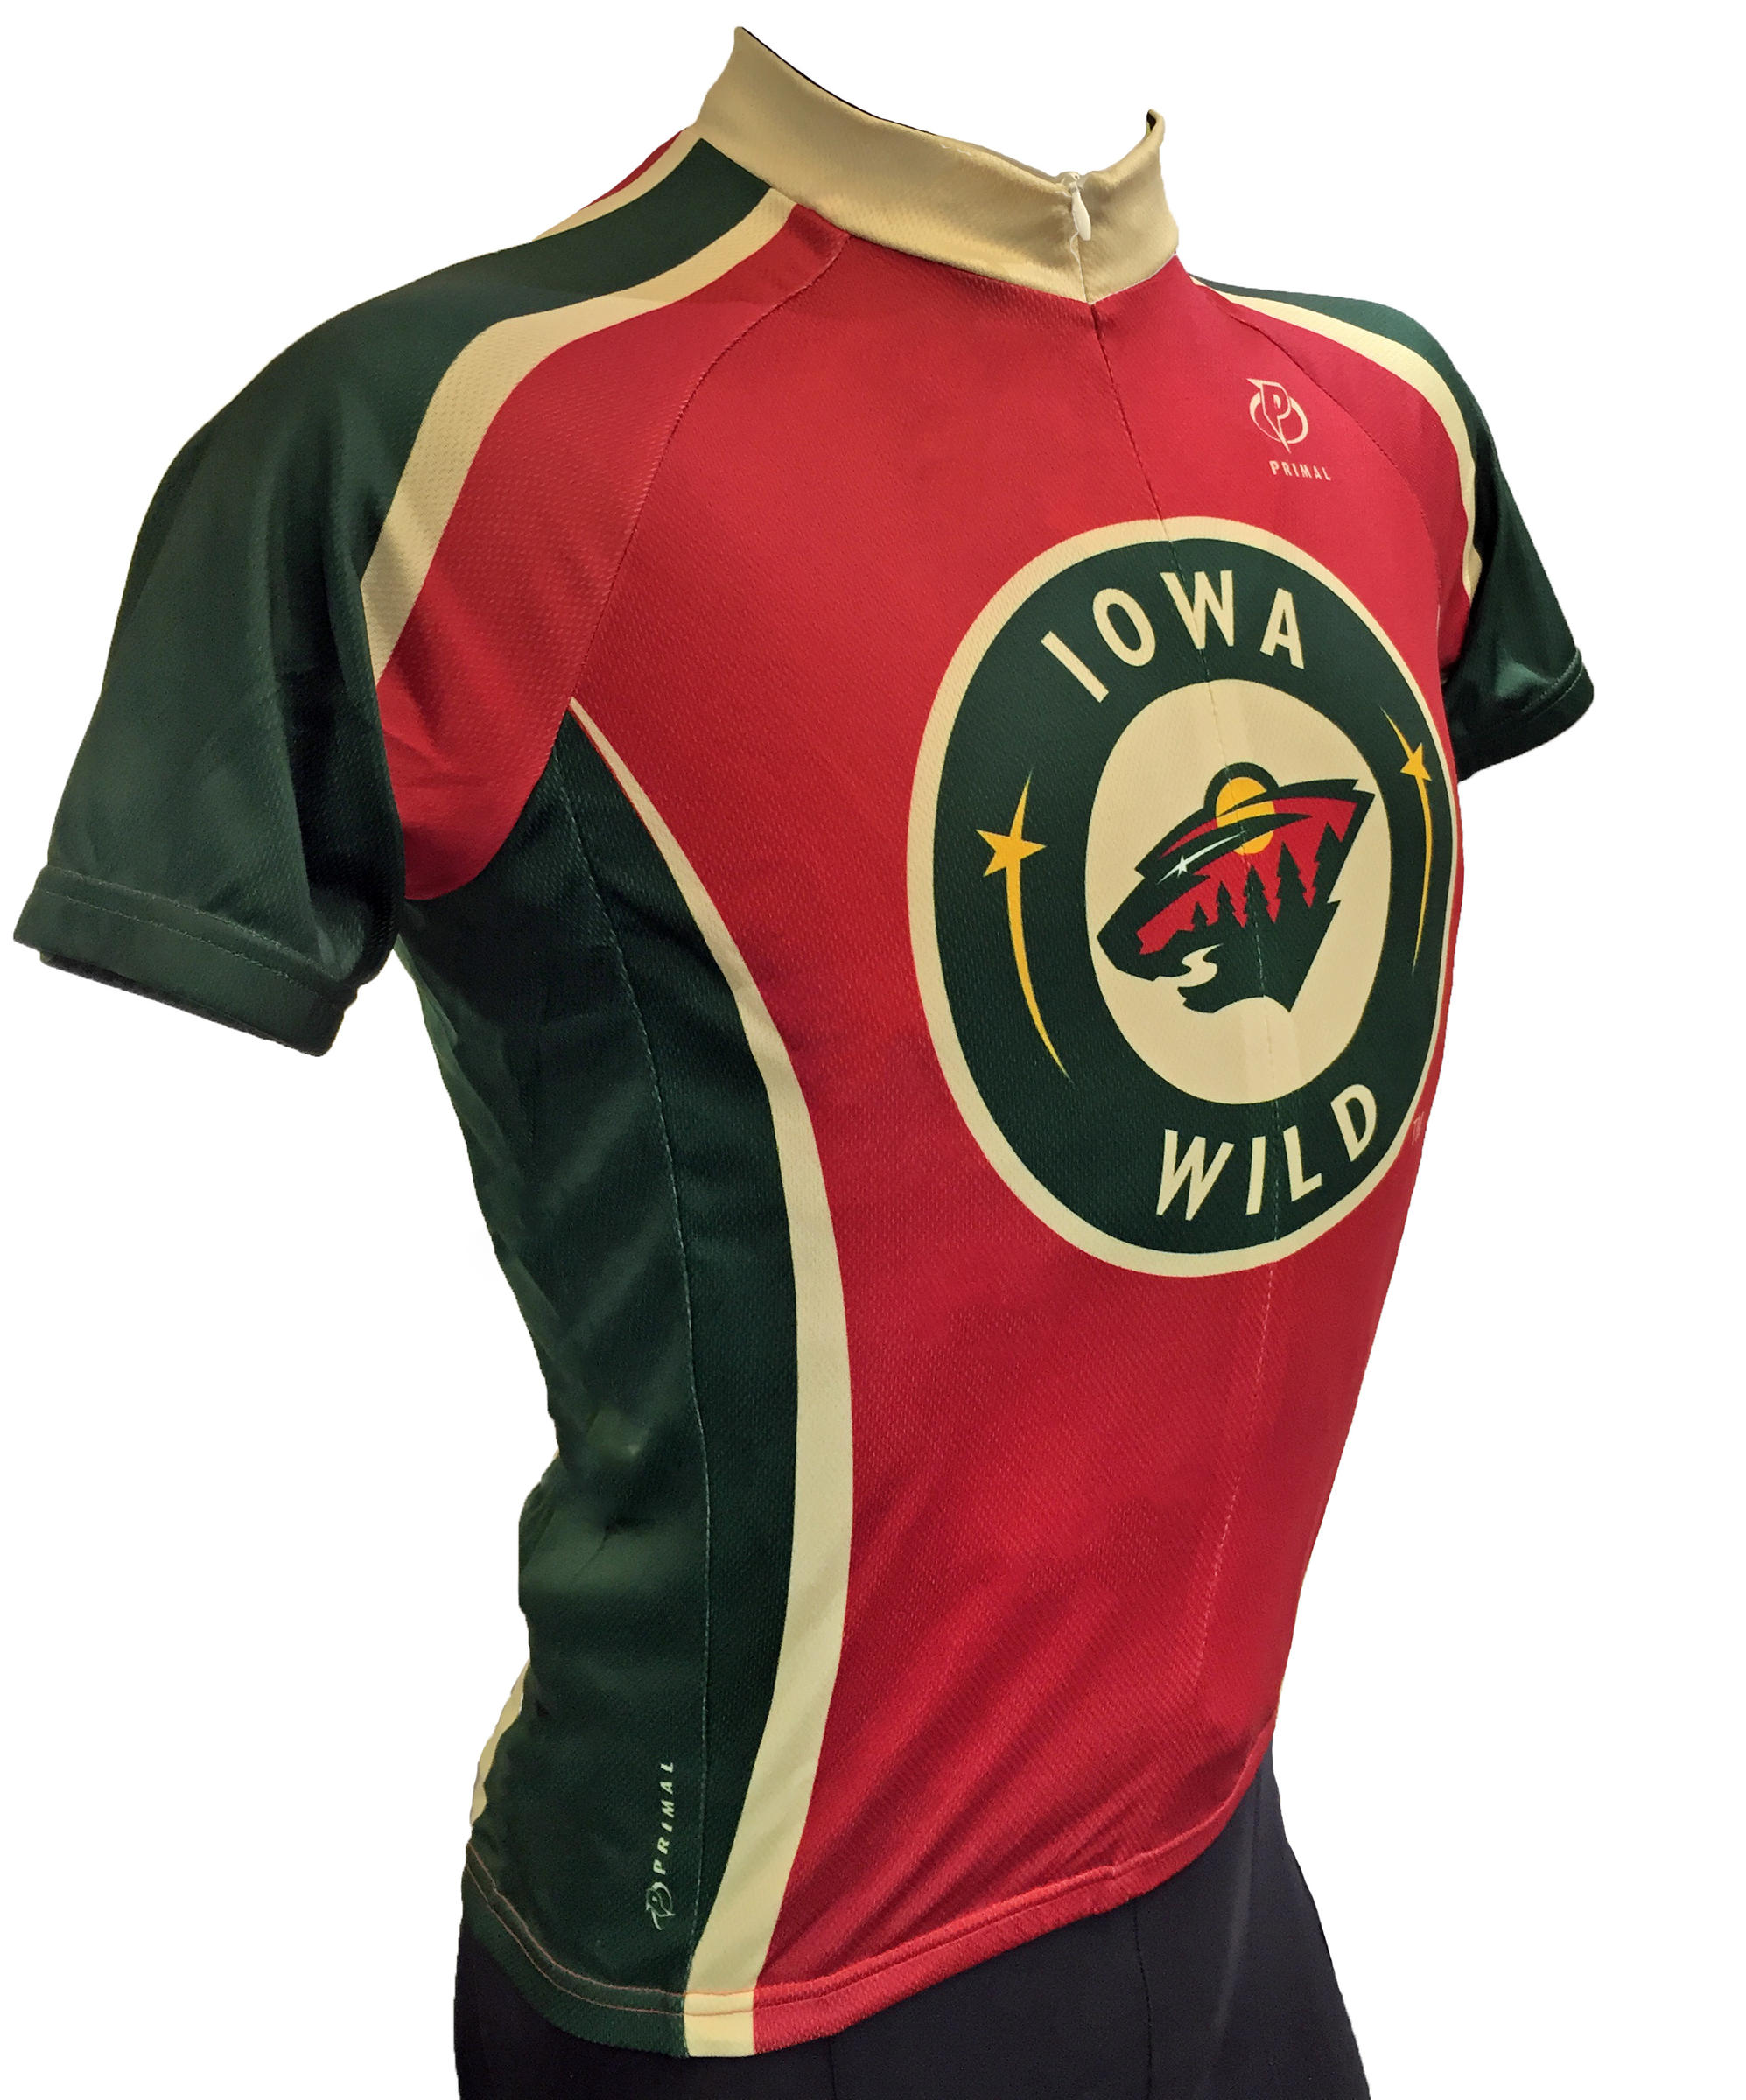 Primal Wear Outlet, Cycling Clothing Outlet, Bike Apparel Outlet